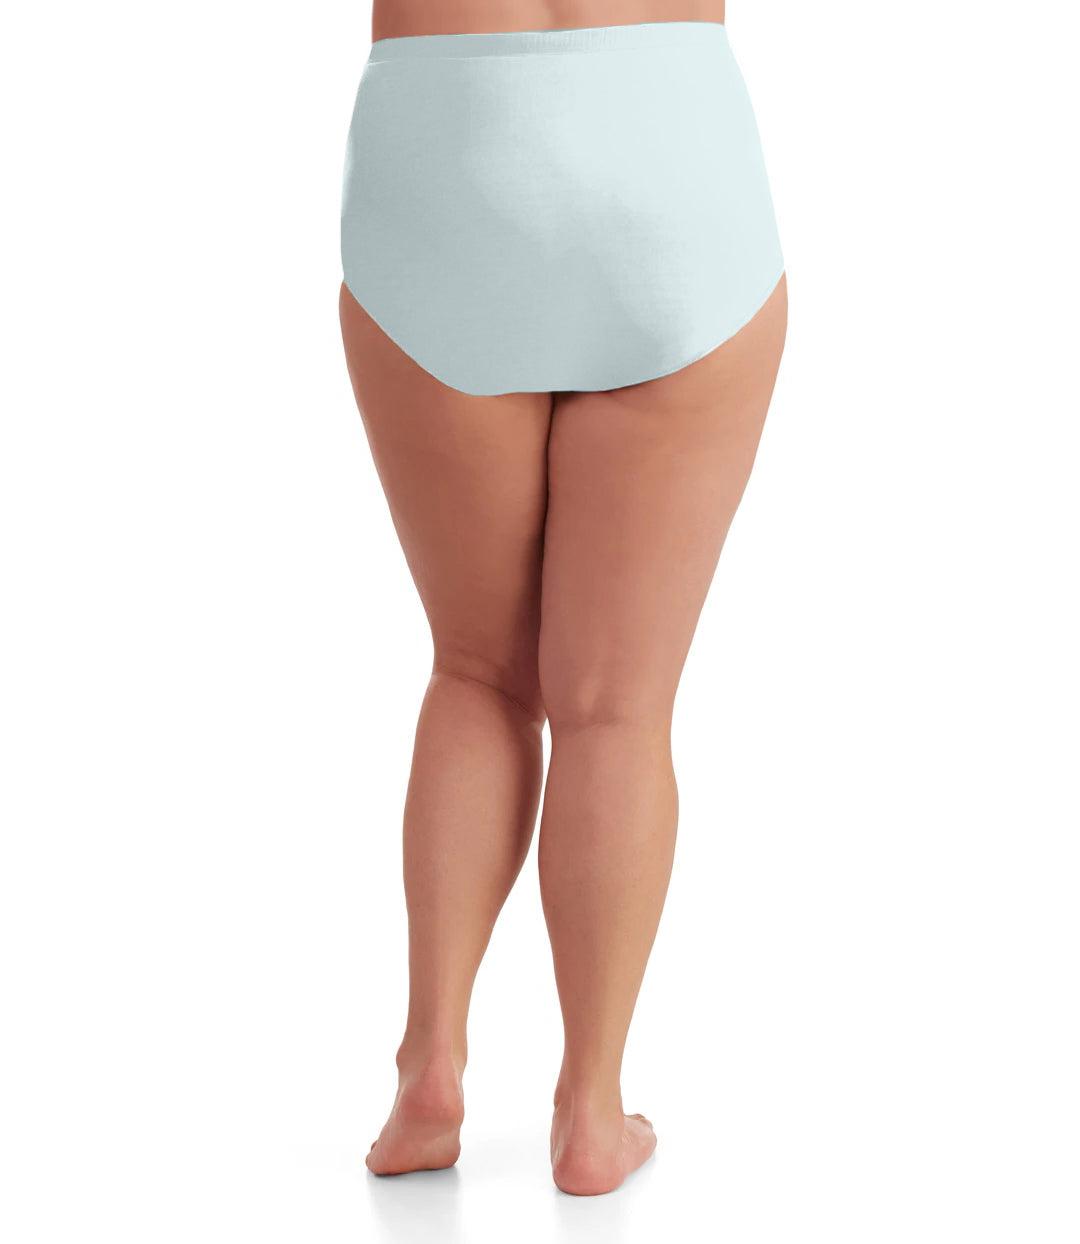 Bottom half of plus sized woman, back view, wearing JunoActive Junowear Cotton Stretch Classic Full Fit Brief in light blue. This brief has a high waist fit with conservative leg opening.